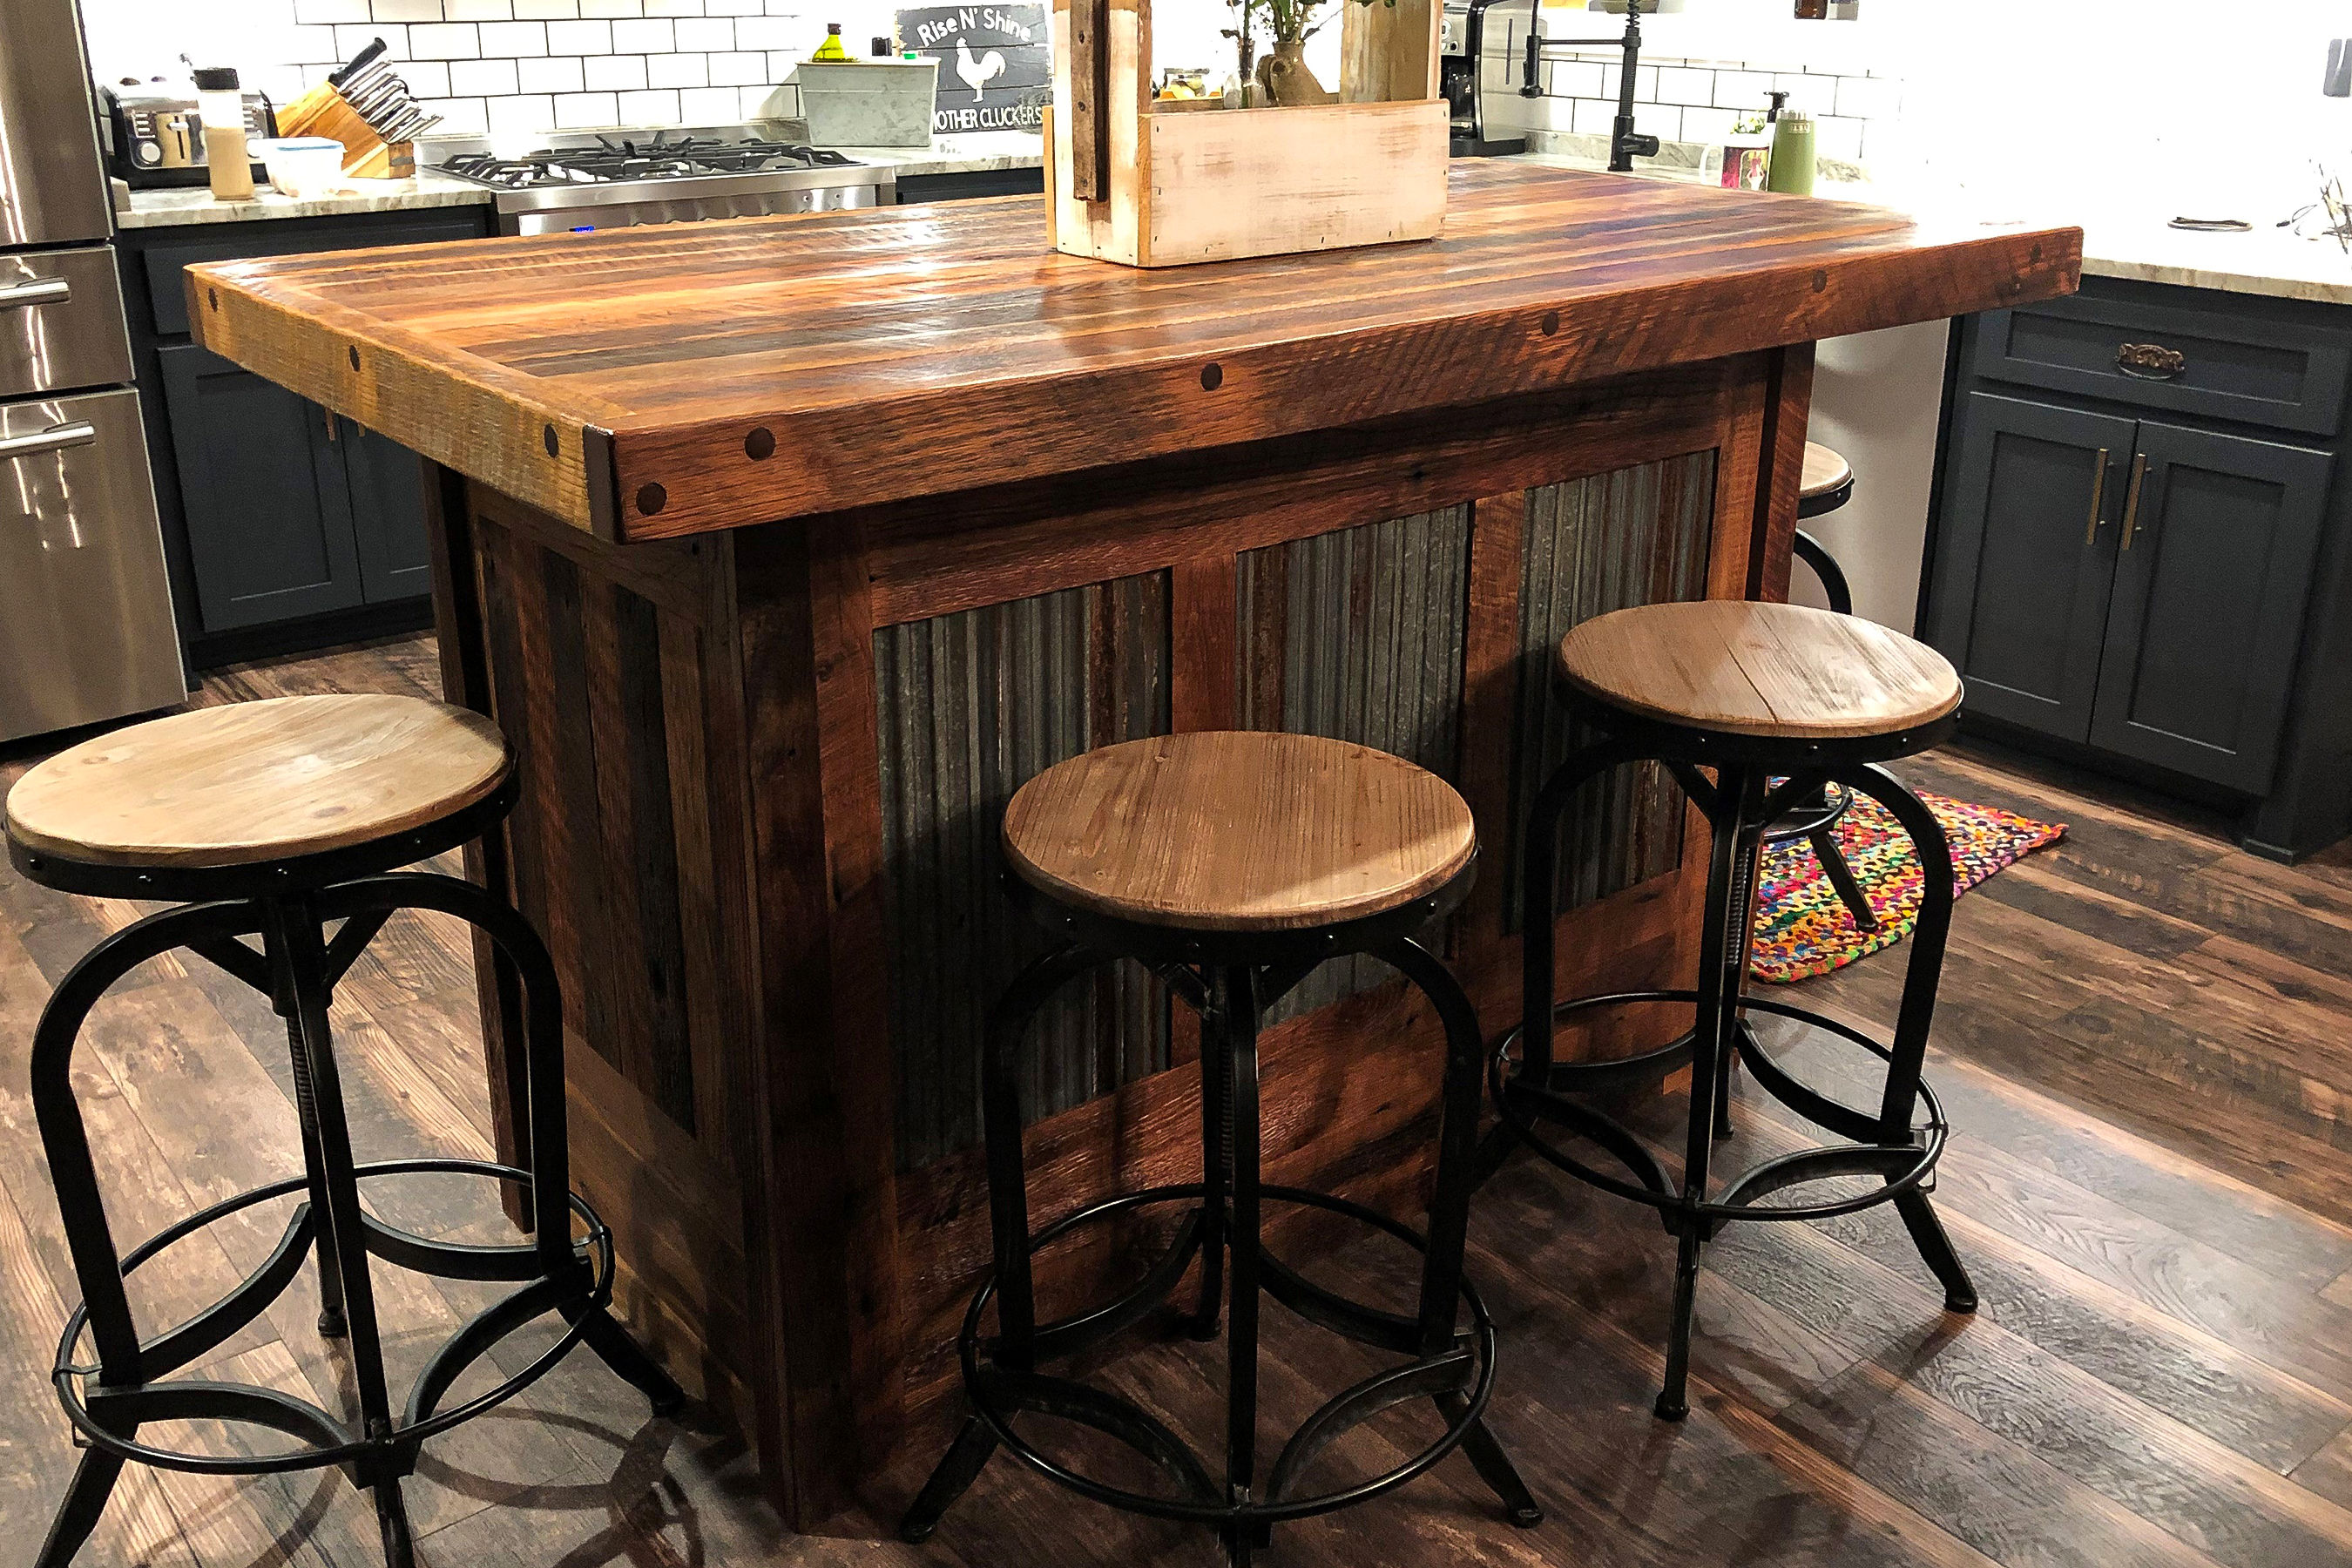 A custom Barnwood kitchen island that was designed and handcrafted specifically for a lake home. <br>"Wanted to share these pics. We just love this island!" - Jessica K.